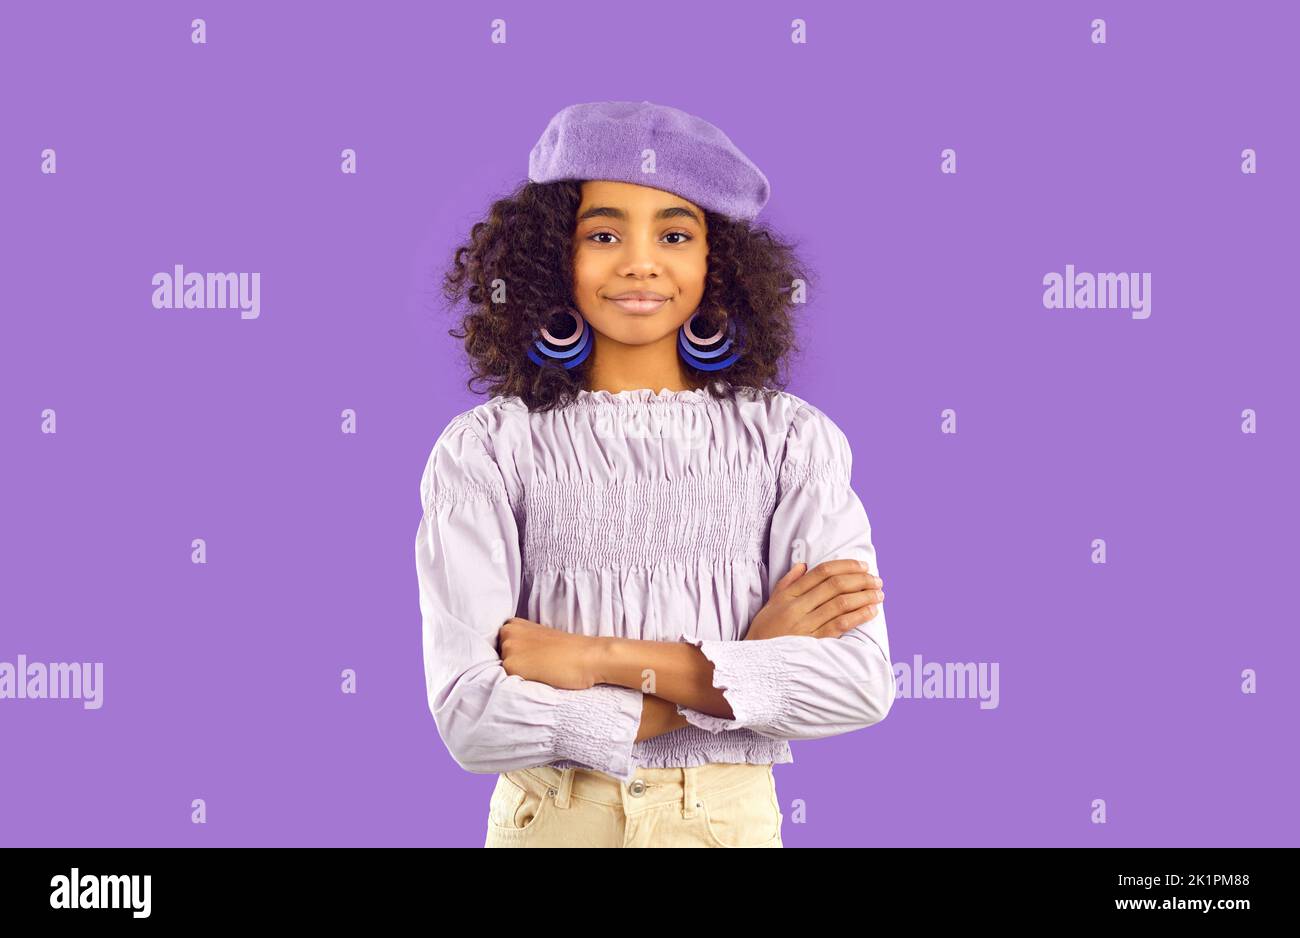 Happy pretty child in stylish top and beret hat standing on purple studio background Stock Photo